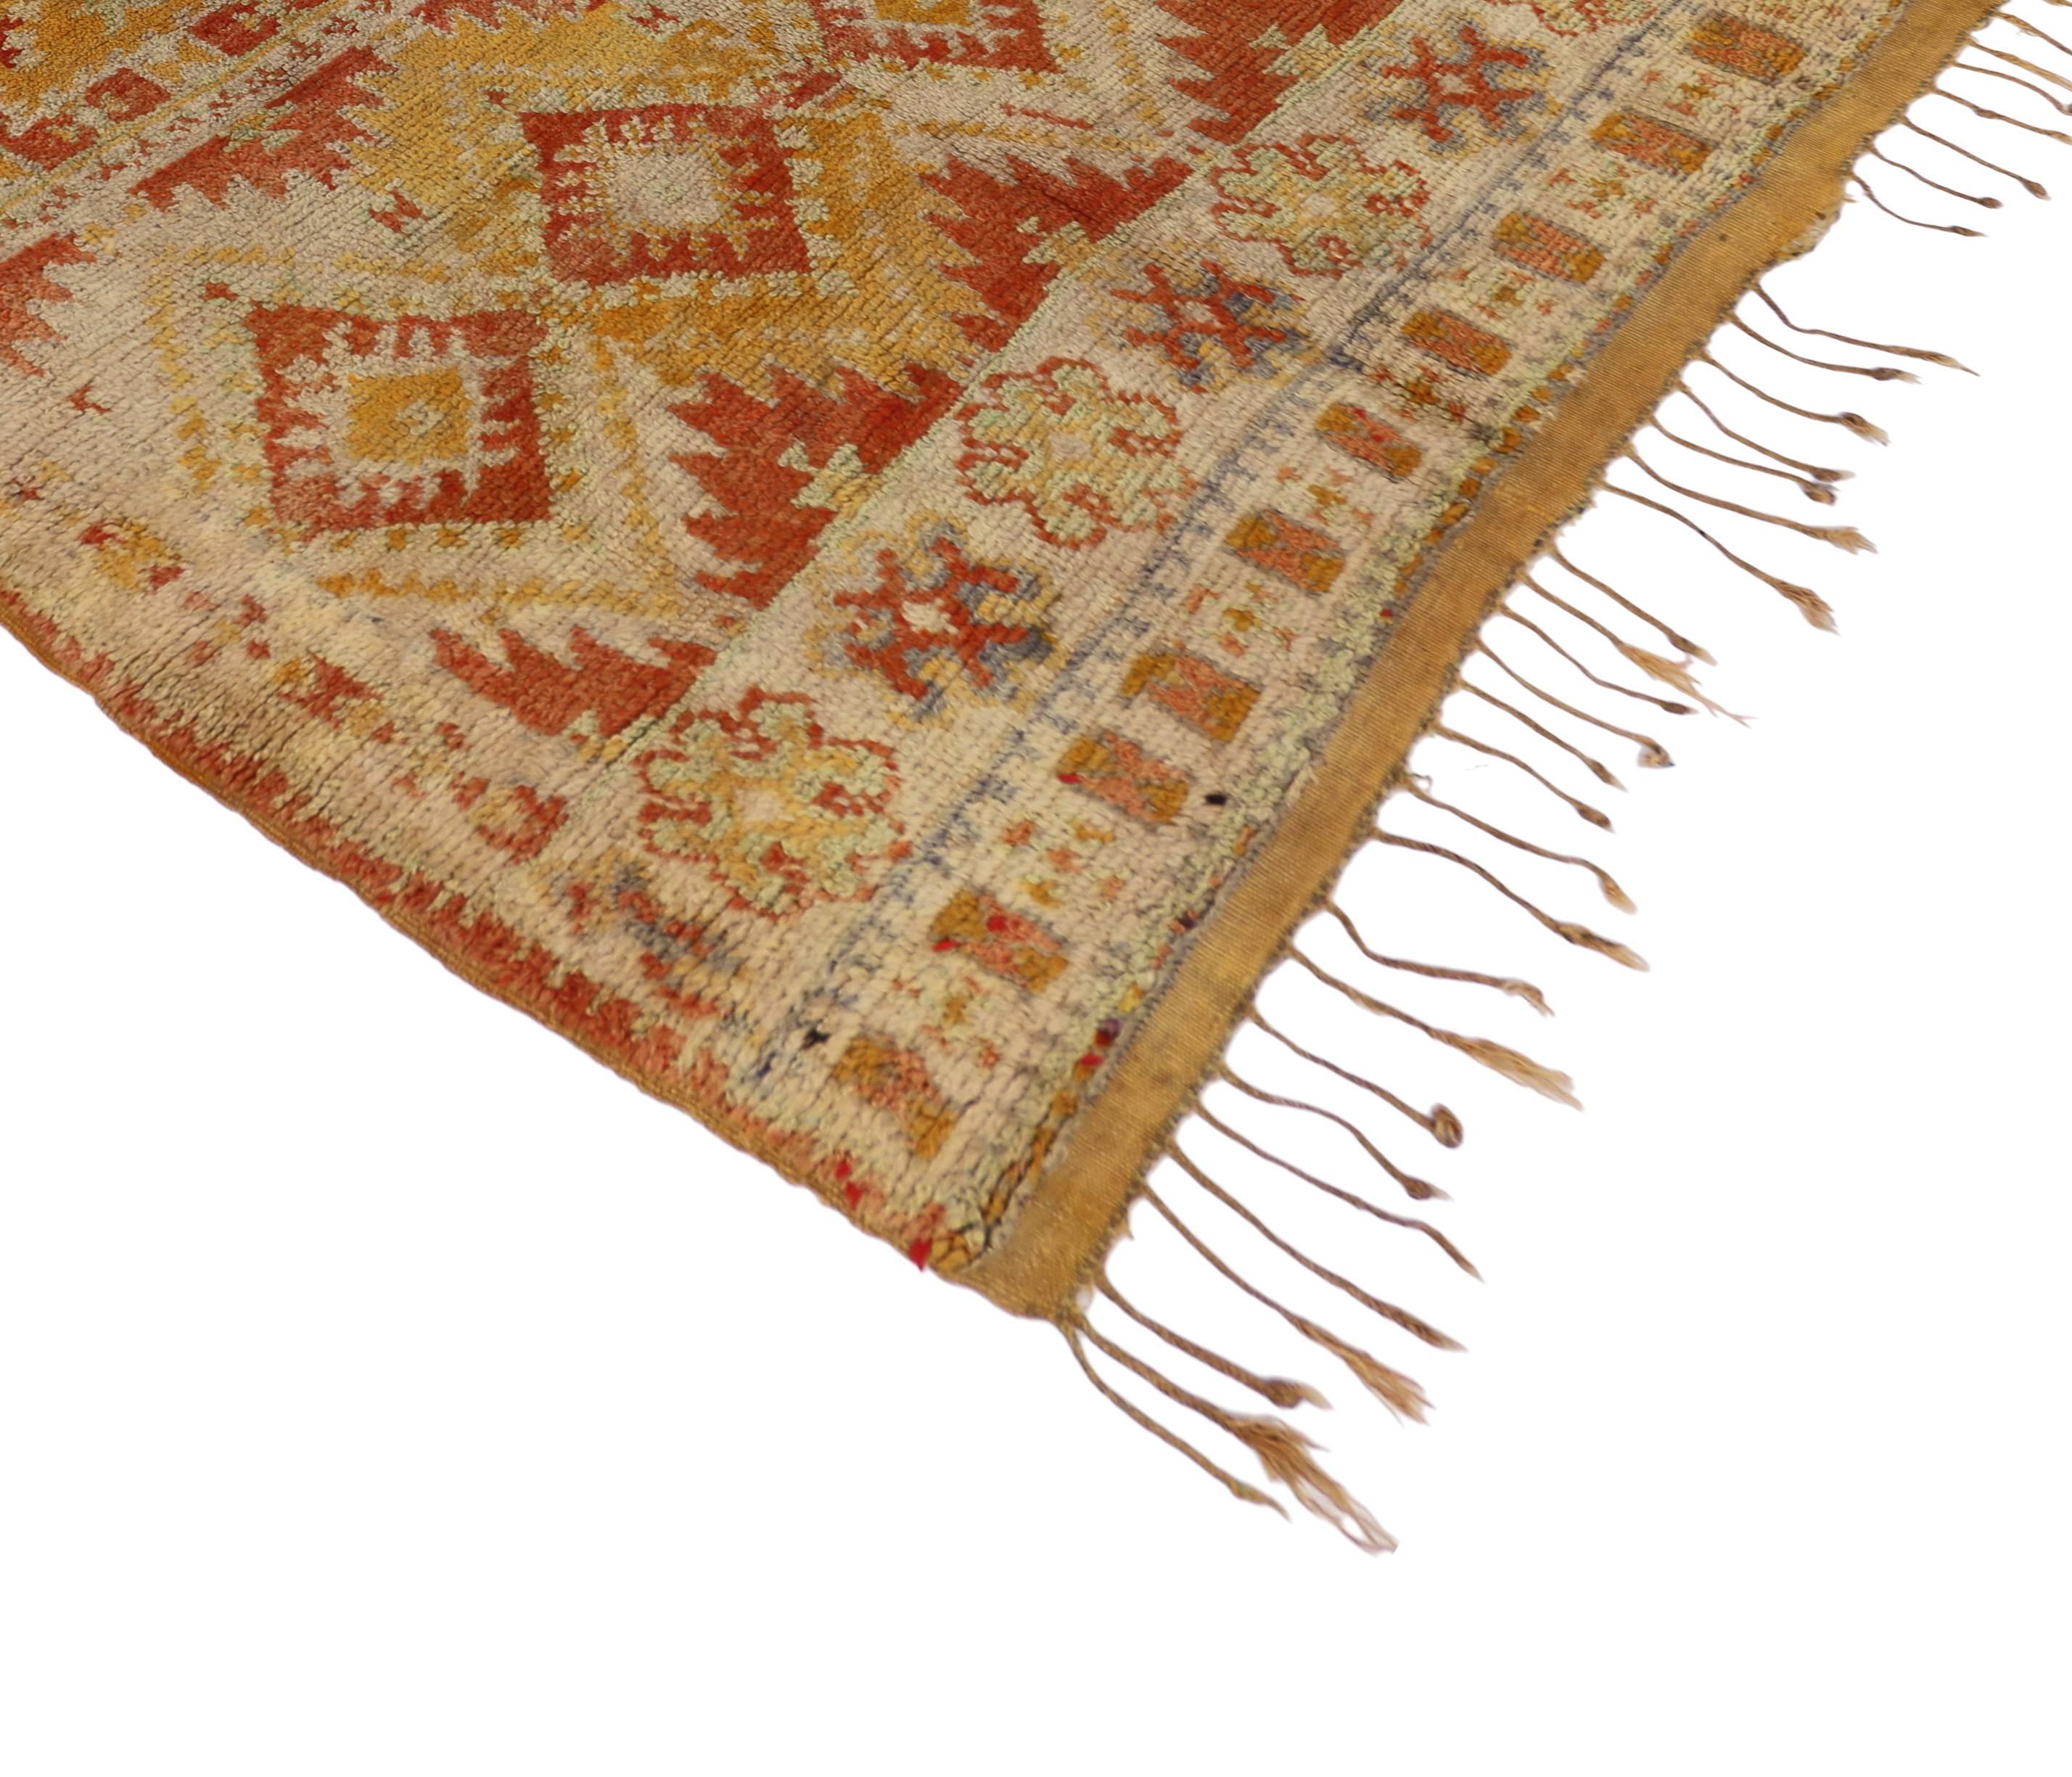 74561, vintage Berber Moroccan rug with tribal style. Rendered in variegated shades of rustic red, burnt orange and saffron come together to create imagery of a warm, breezy Moroccan sunset. The time-softened colors blend together throughout the